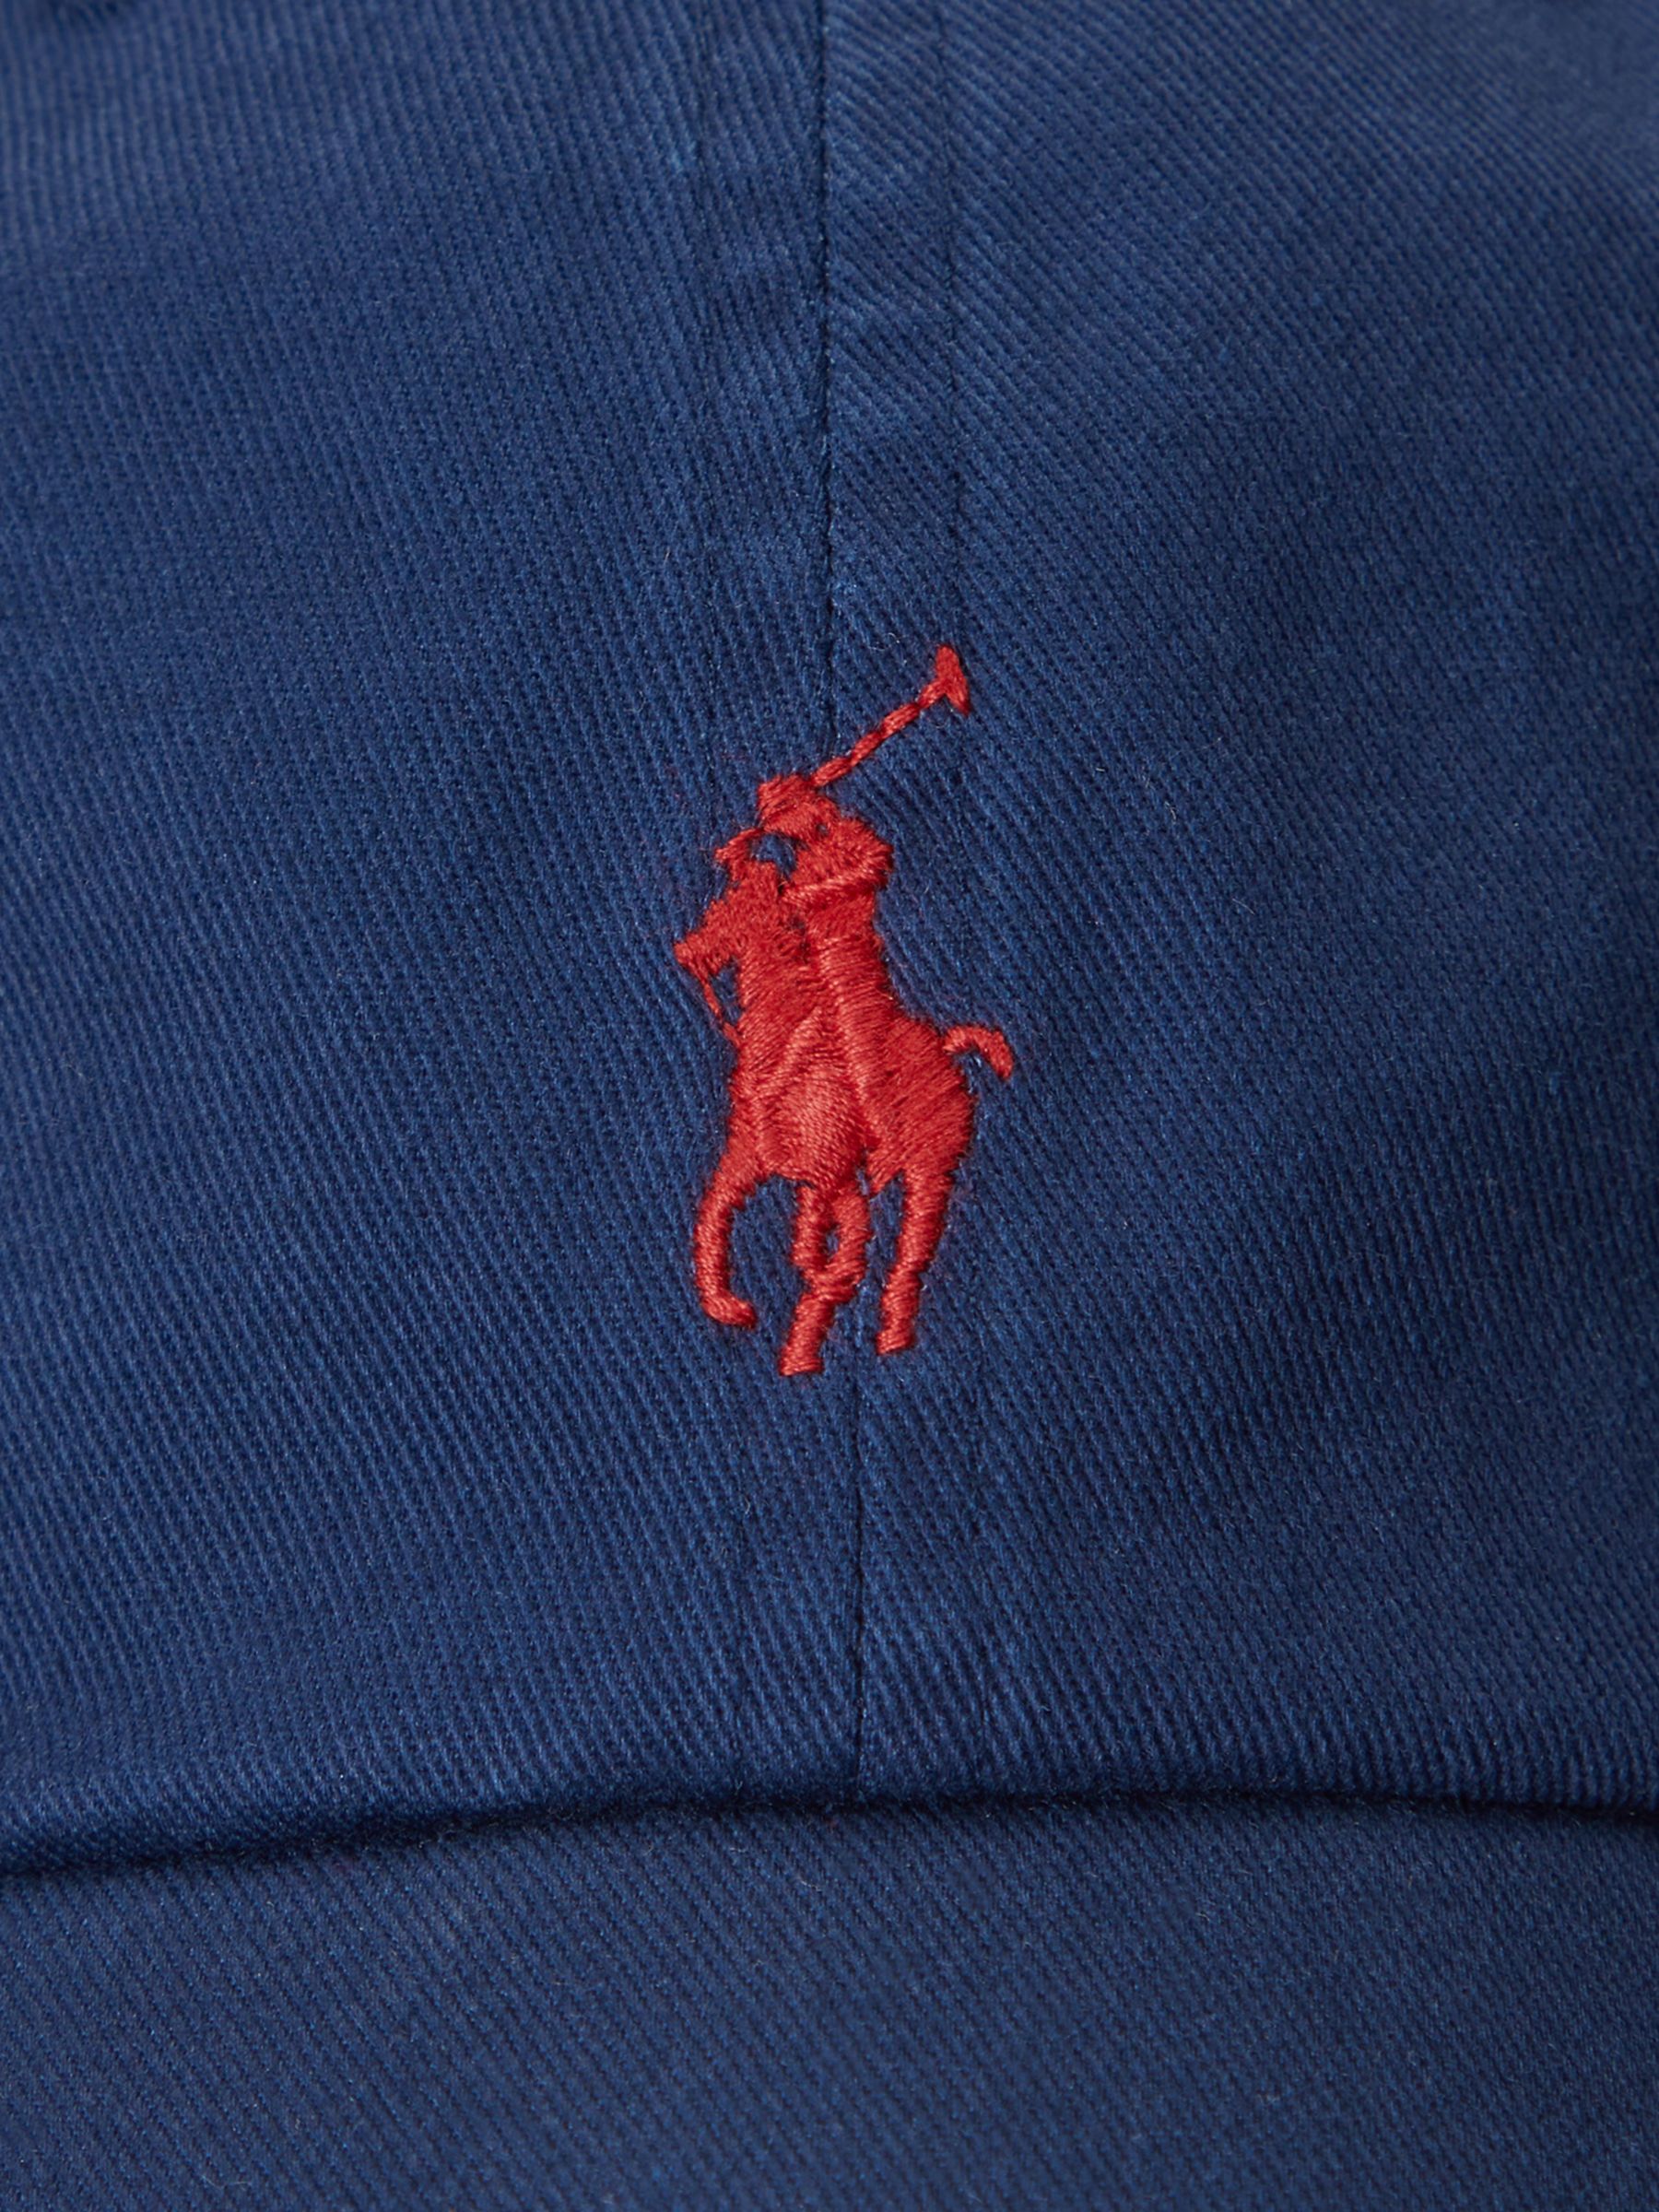 Polo Ralph Lauren Signature Pony Baseball Cap, One Size, Navy/Red at John  Lewis & Partners